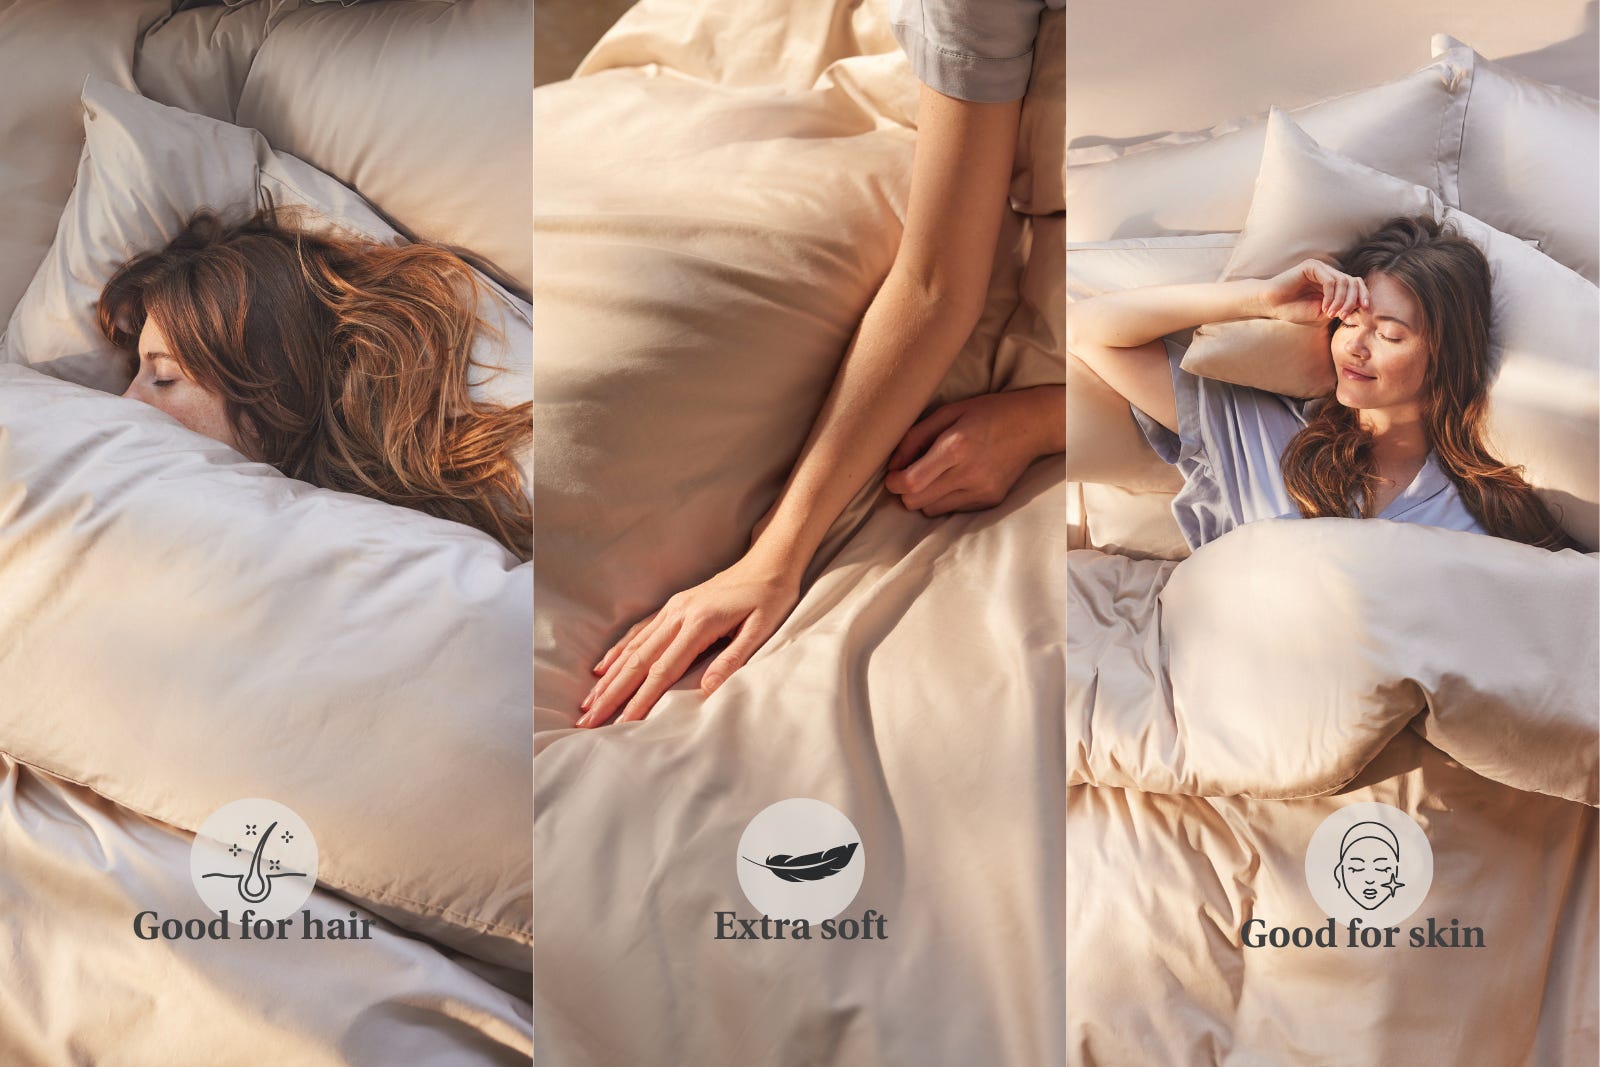 Emma Satin Bed Linen - Beneficial for your skin and hair.